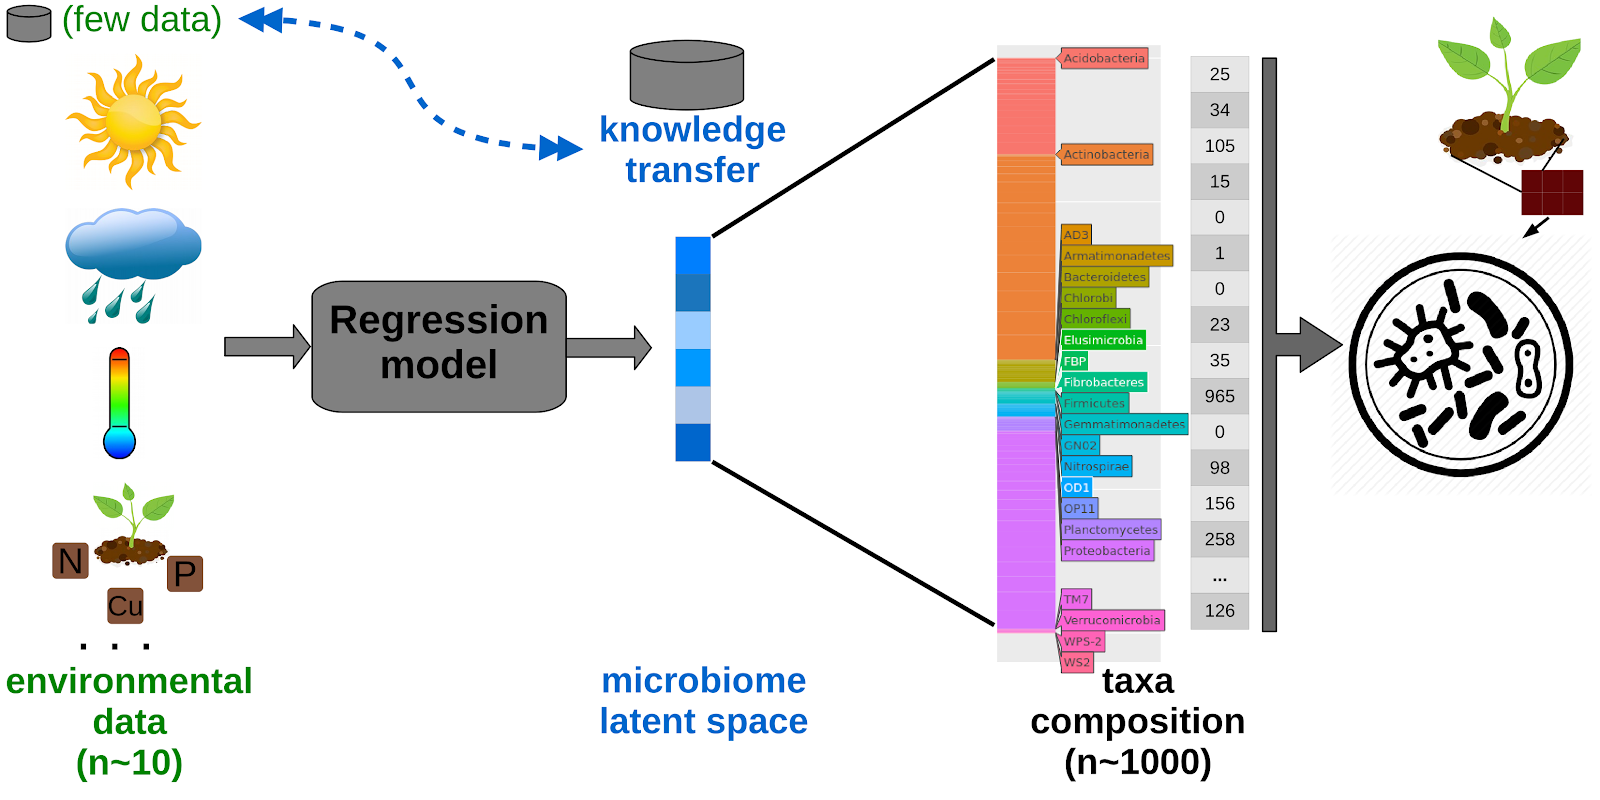 microbiome autoencoder to predict taxa from mapping features